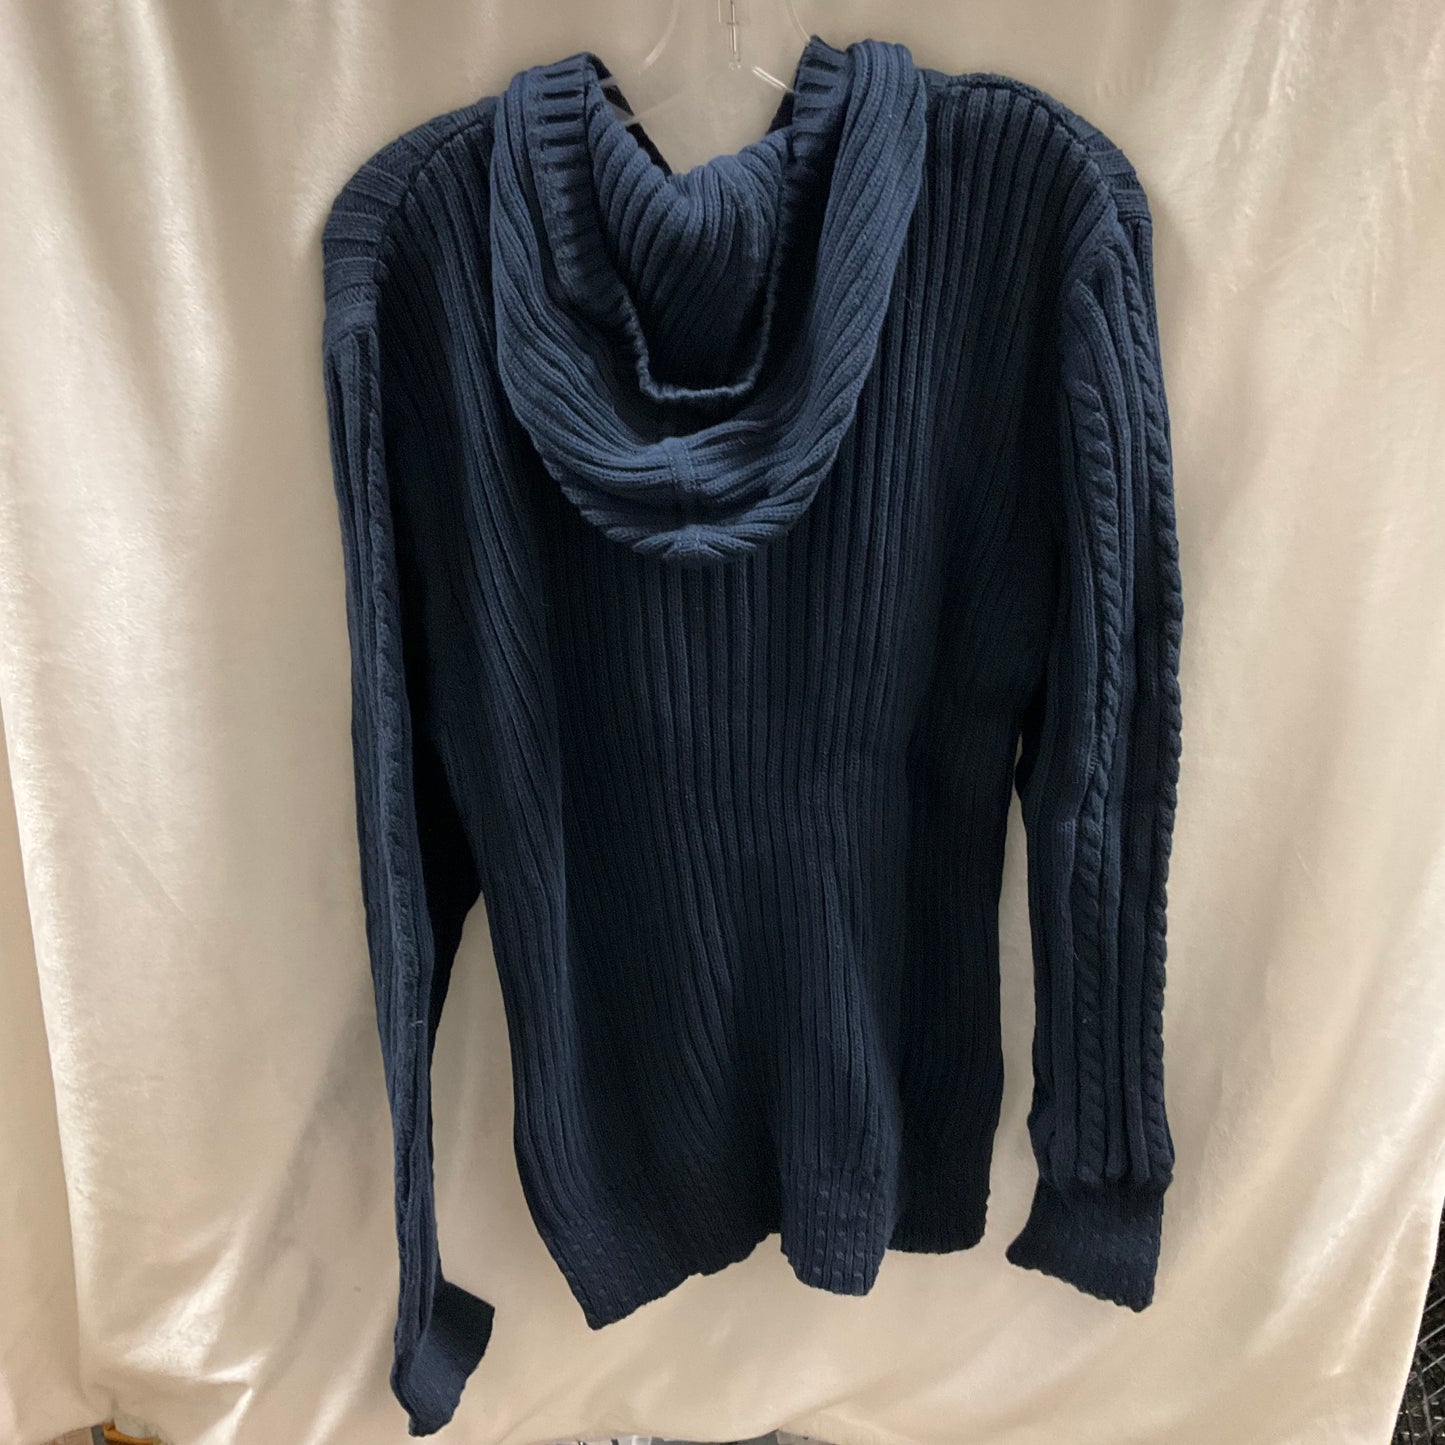 Sweater Cardigan By Lands End  Size: Xl